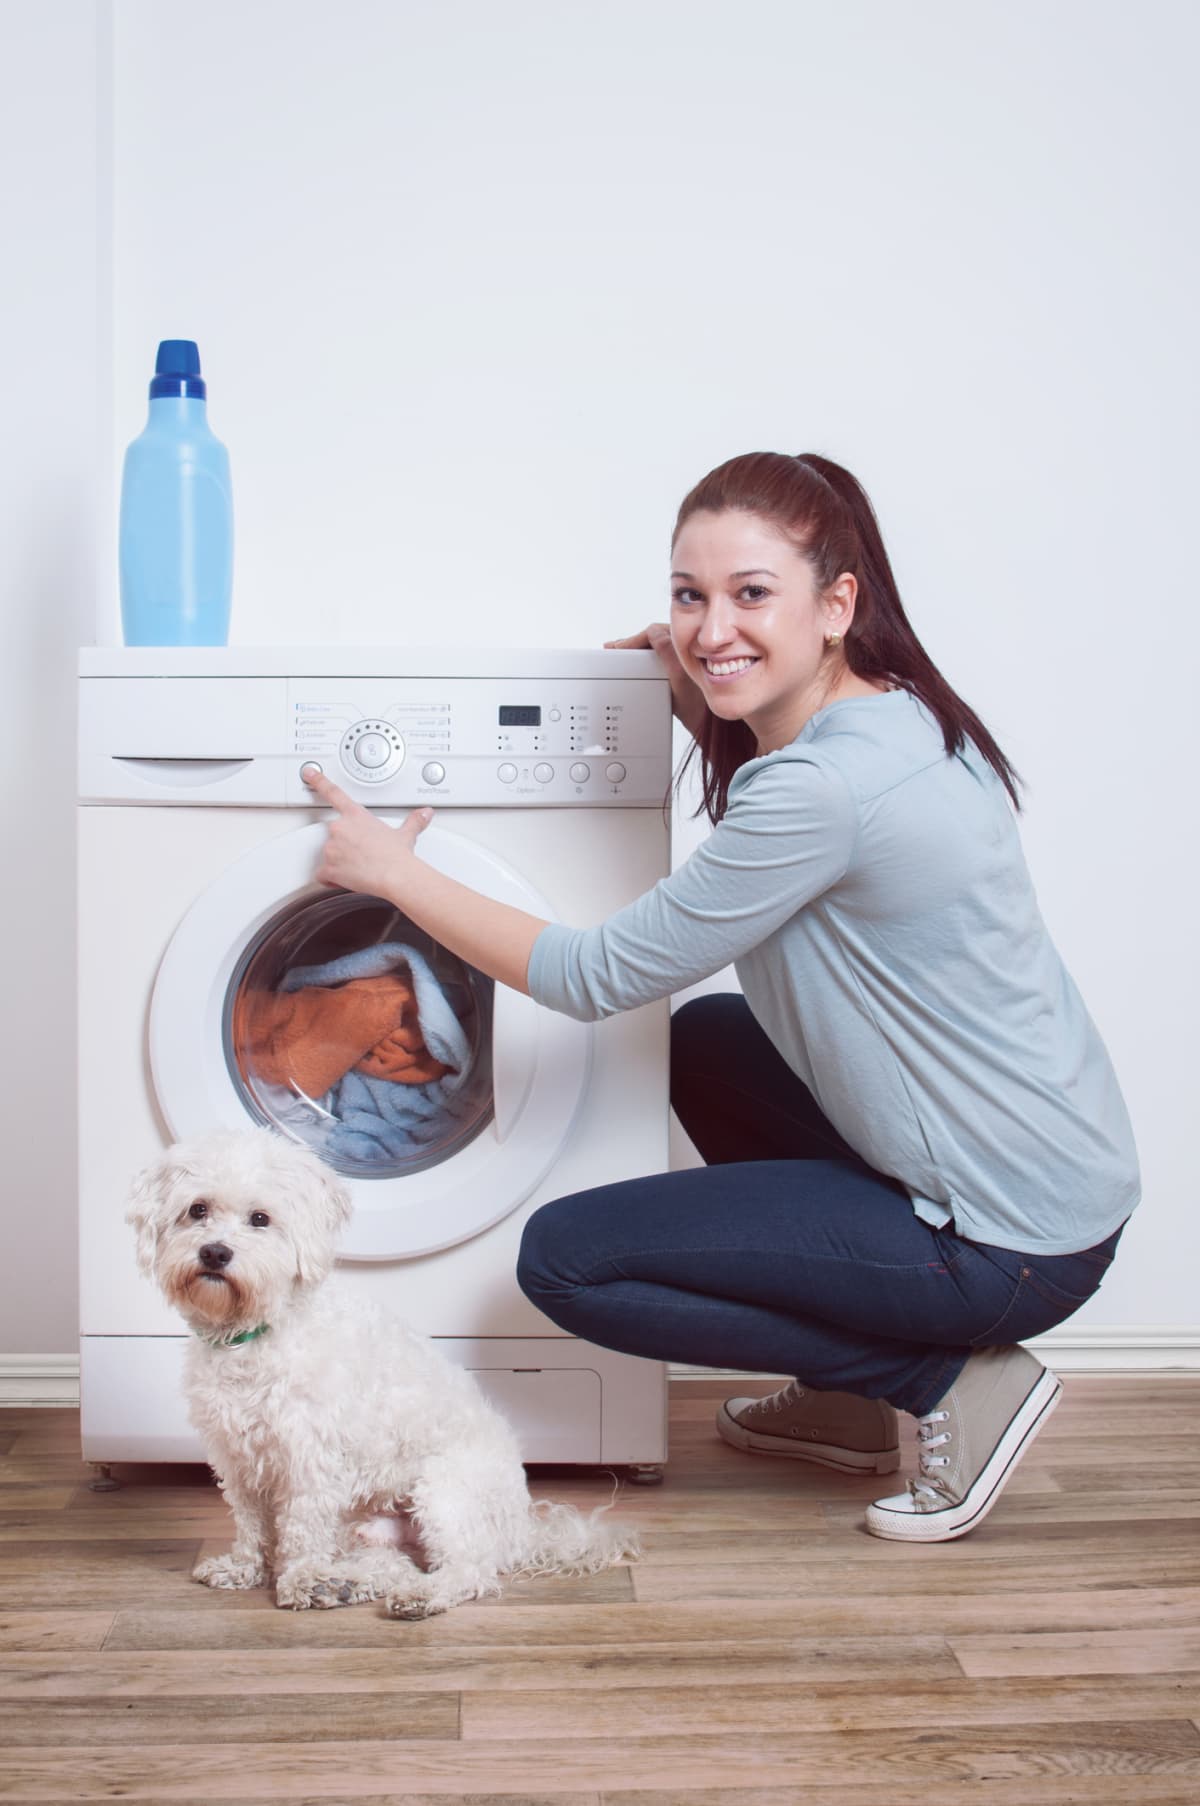 Woman starting dryer with dog sitting nearby